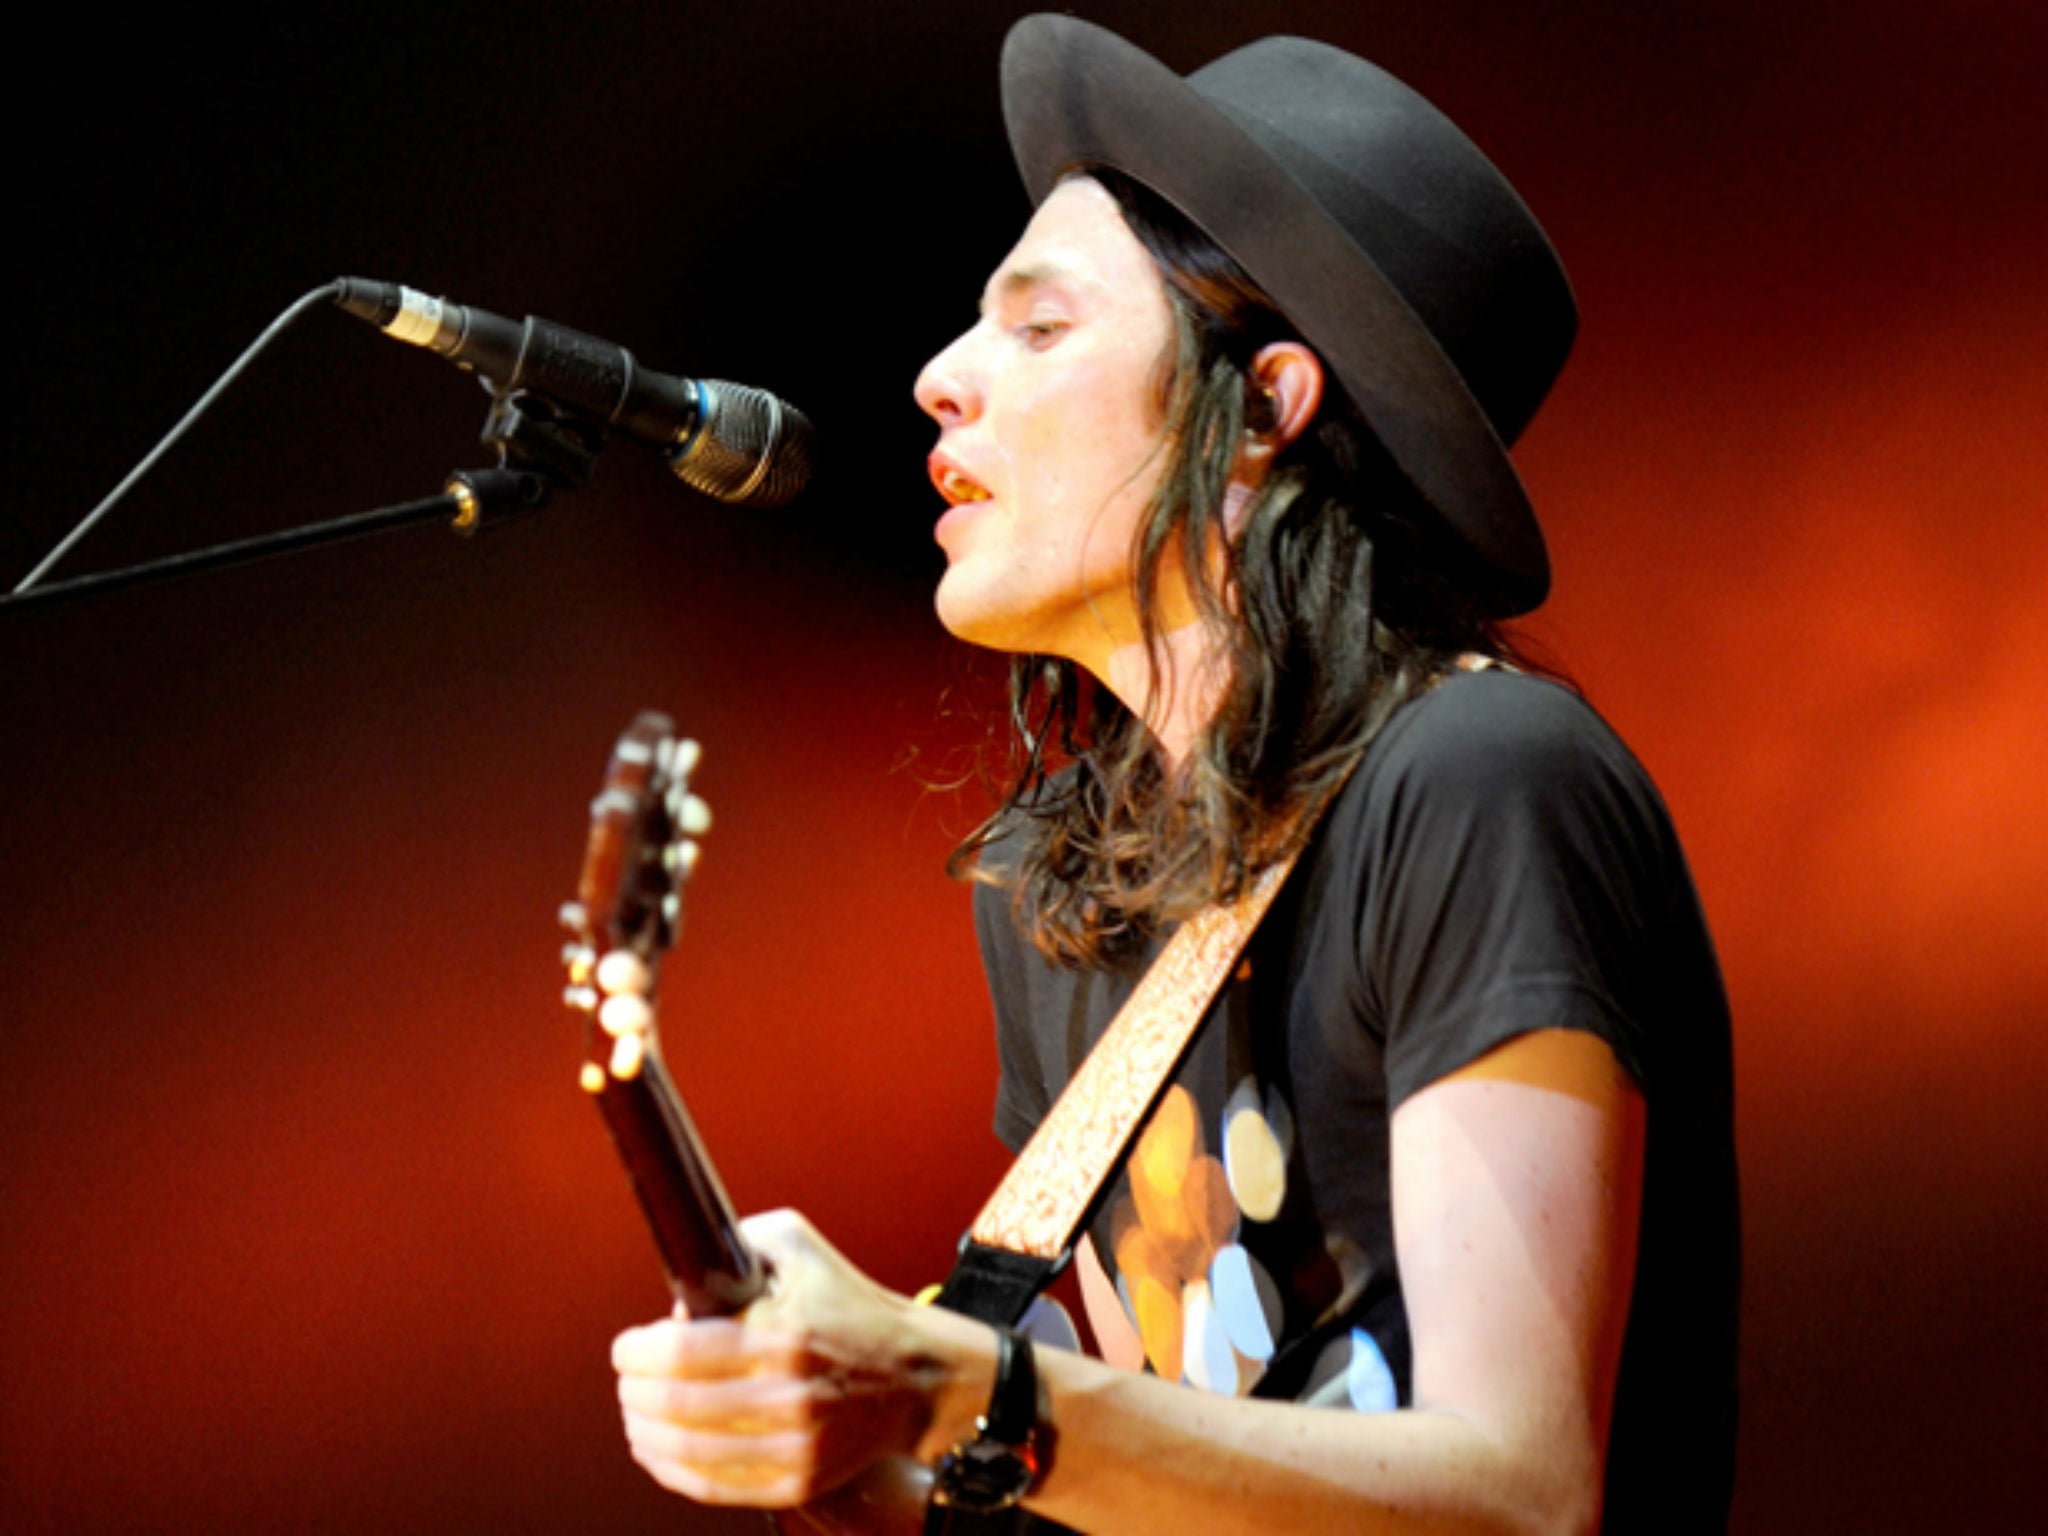 James Bay performs his string of hits at Hammersmith's Eventim Apollo